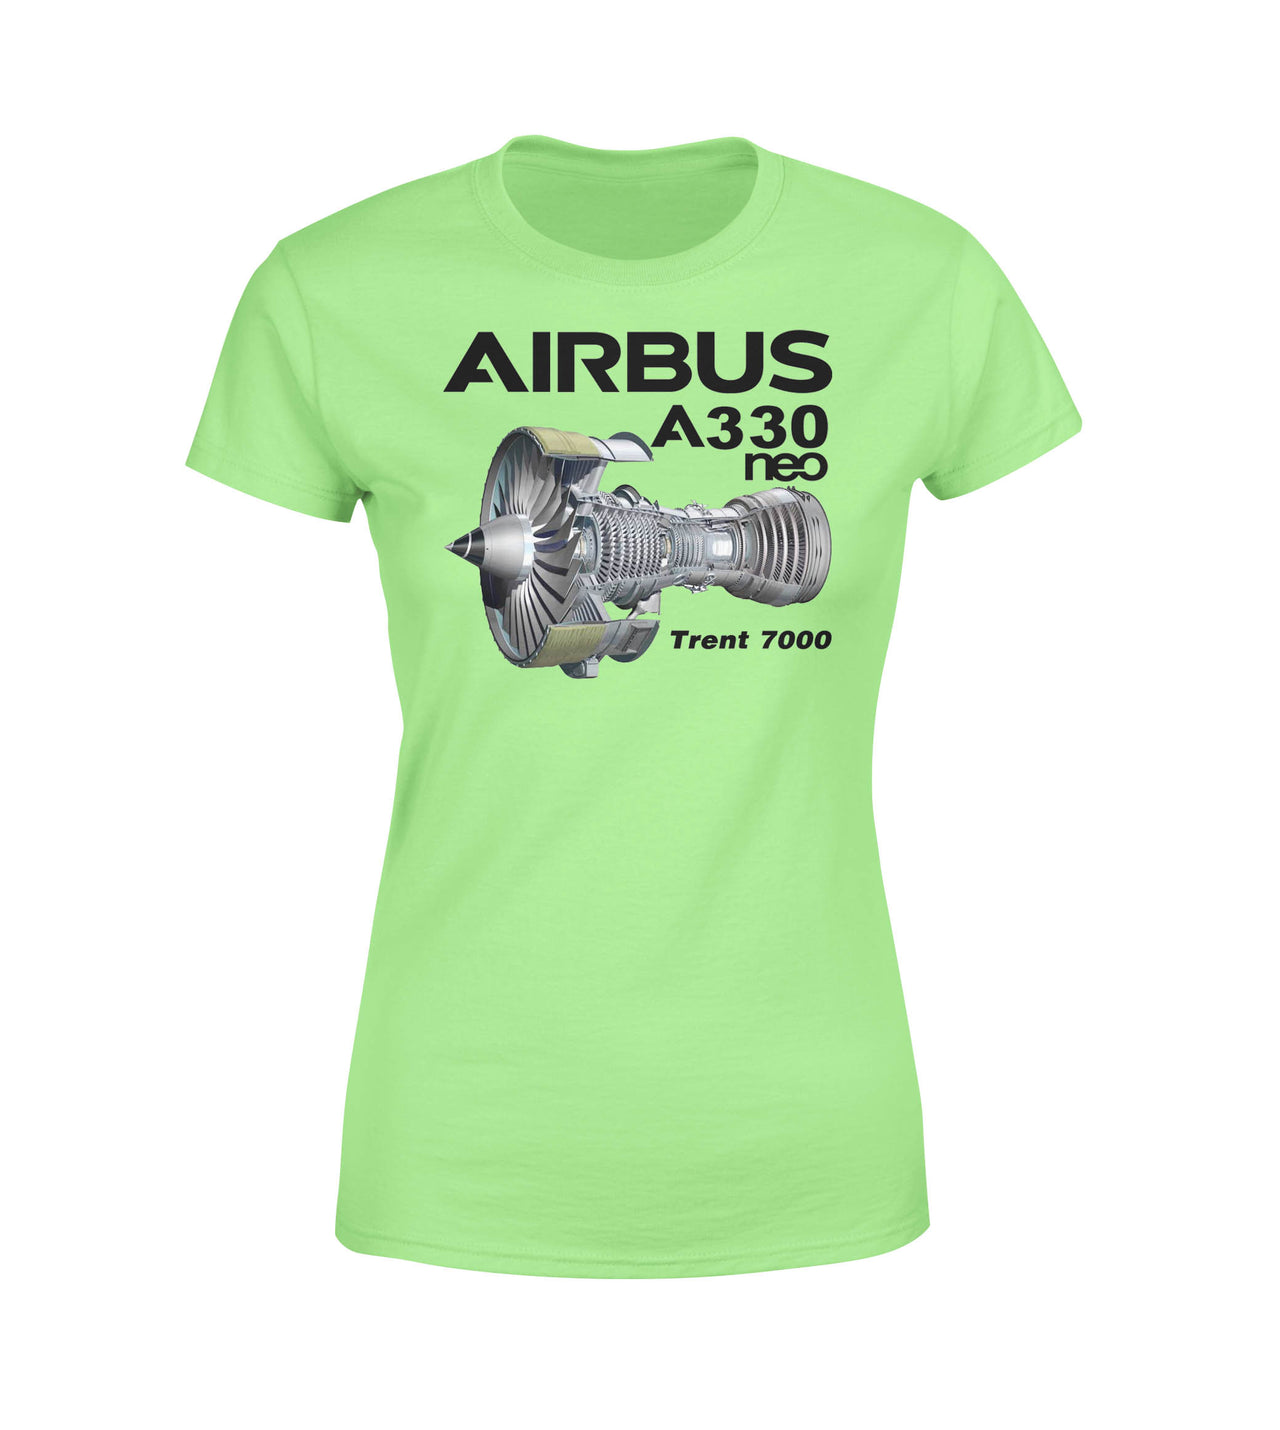 Airbus A330neo & Trent 7000 Engine Designed Women T-Shirts